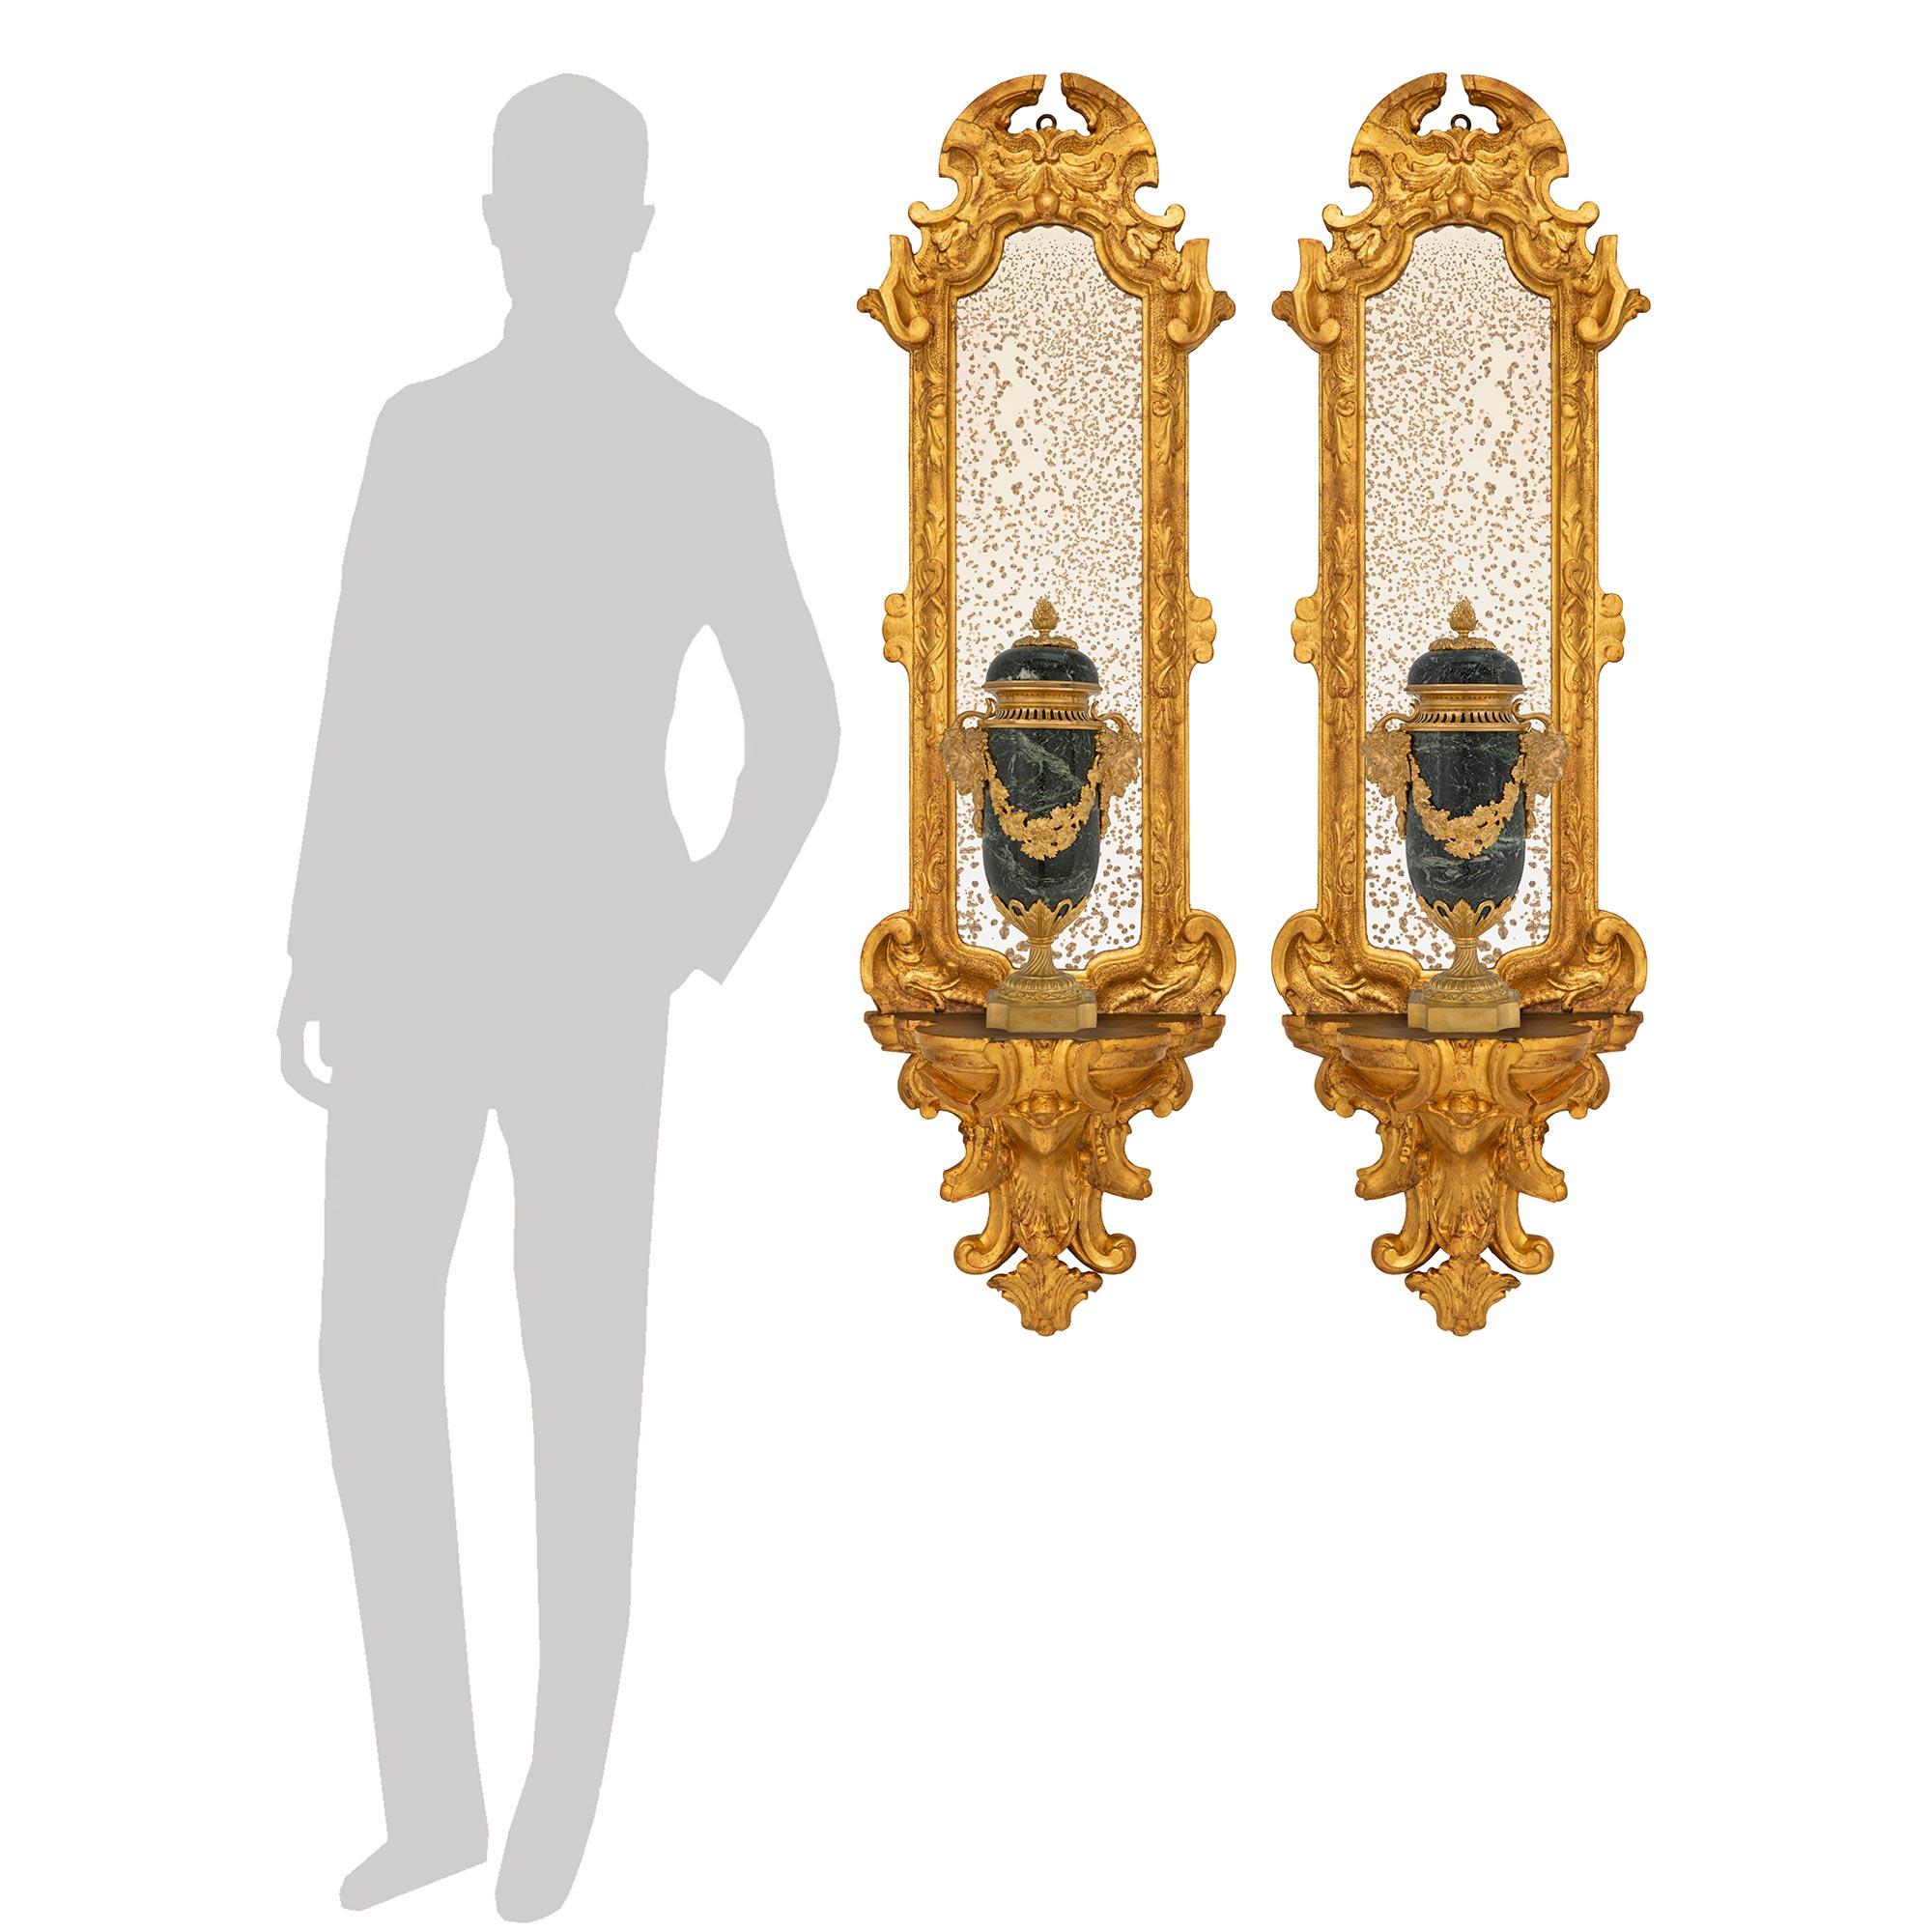 A stunning and finely detailed pair of Italian 17th century Baroque period Giltwood mirrored wall brackets. Each wall bracket is centered by an impressive richly carved bottom foliate display shelf with elegant scrolled designs. Above the display